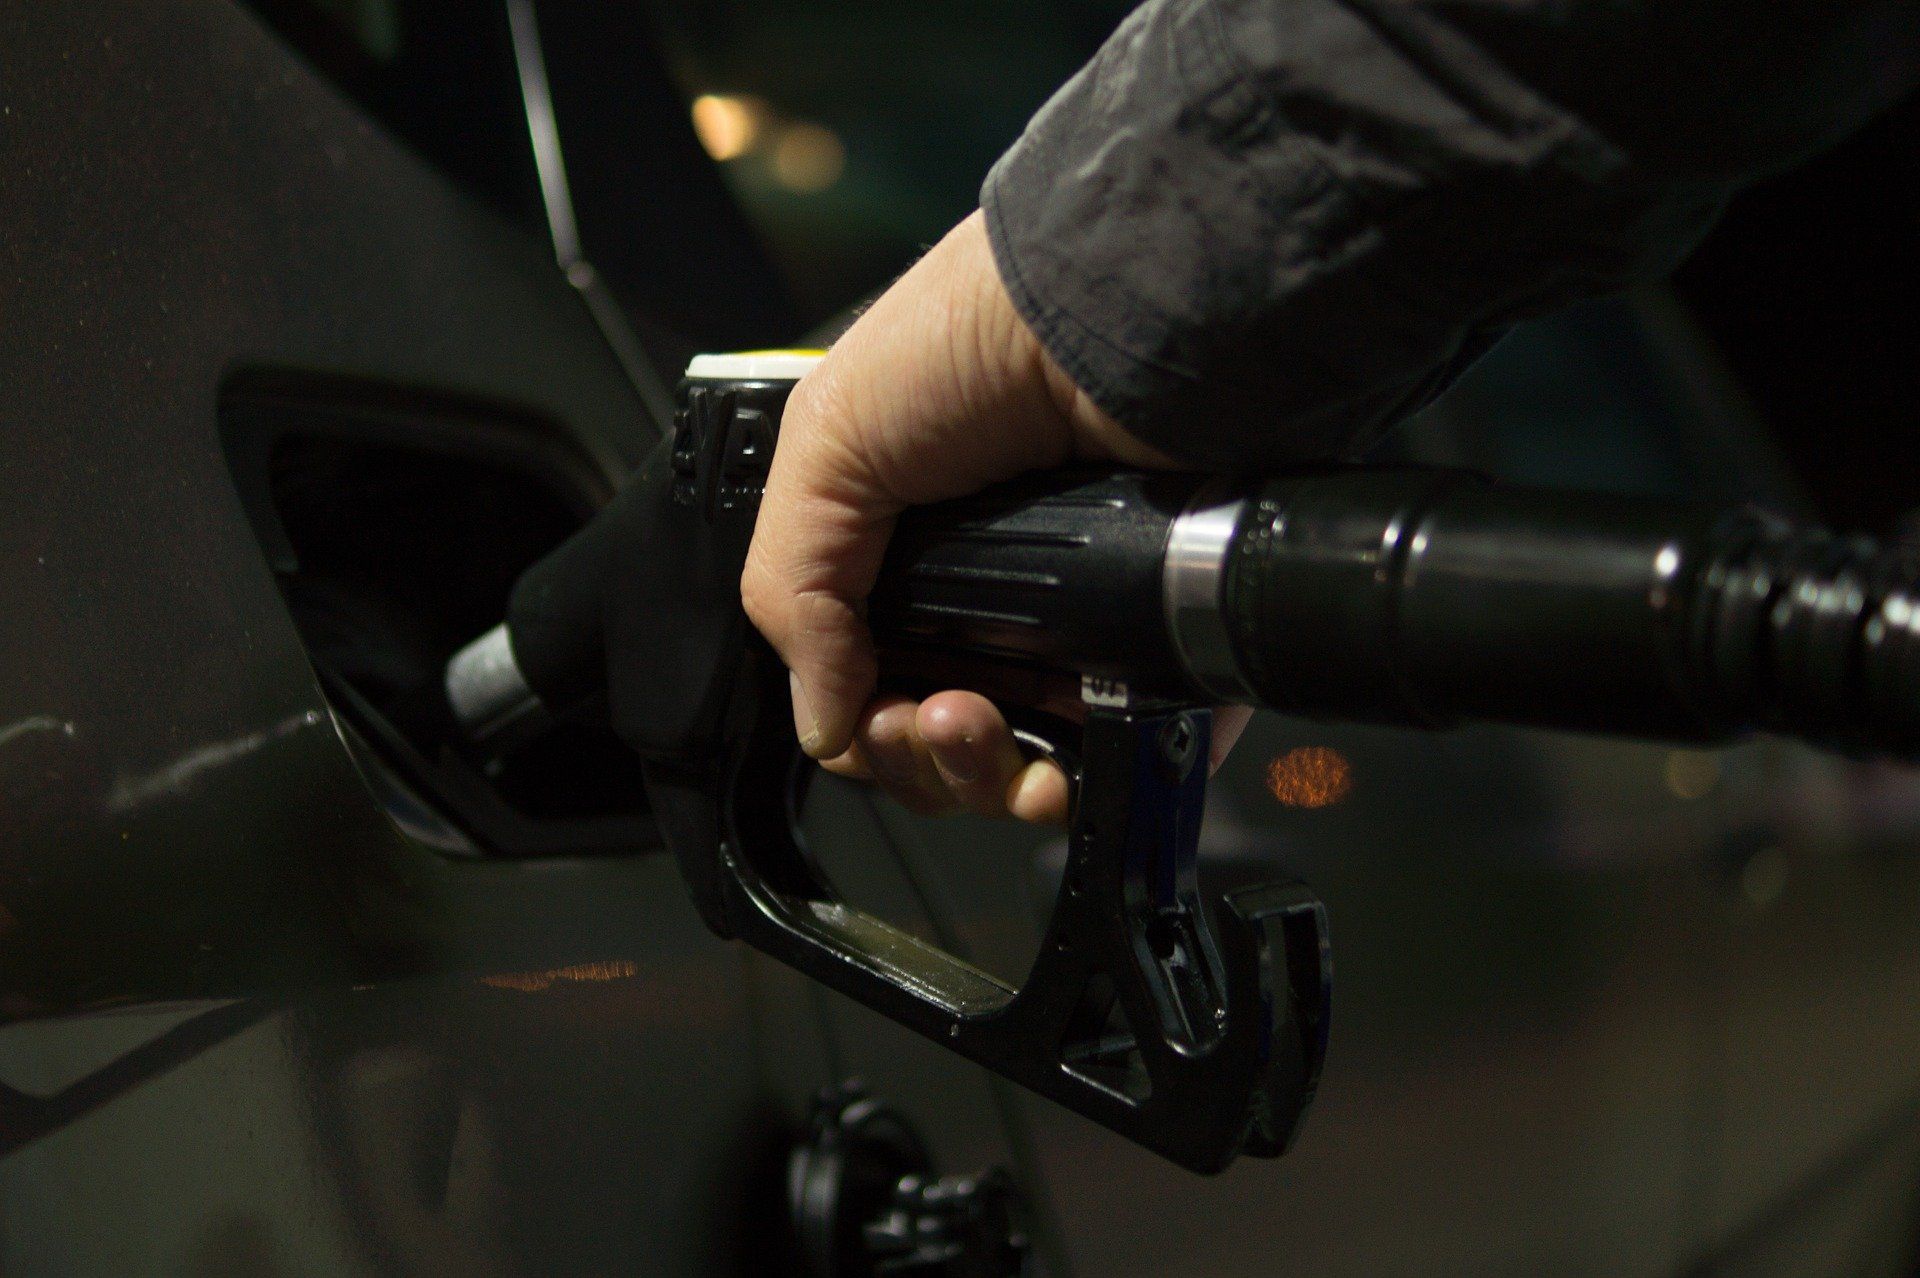 Fuel prices hike: Petrol and Diesel rates increased by 40 paise on April 4